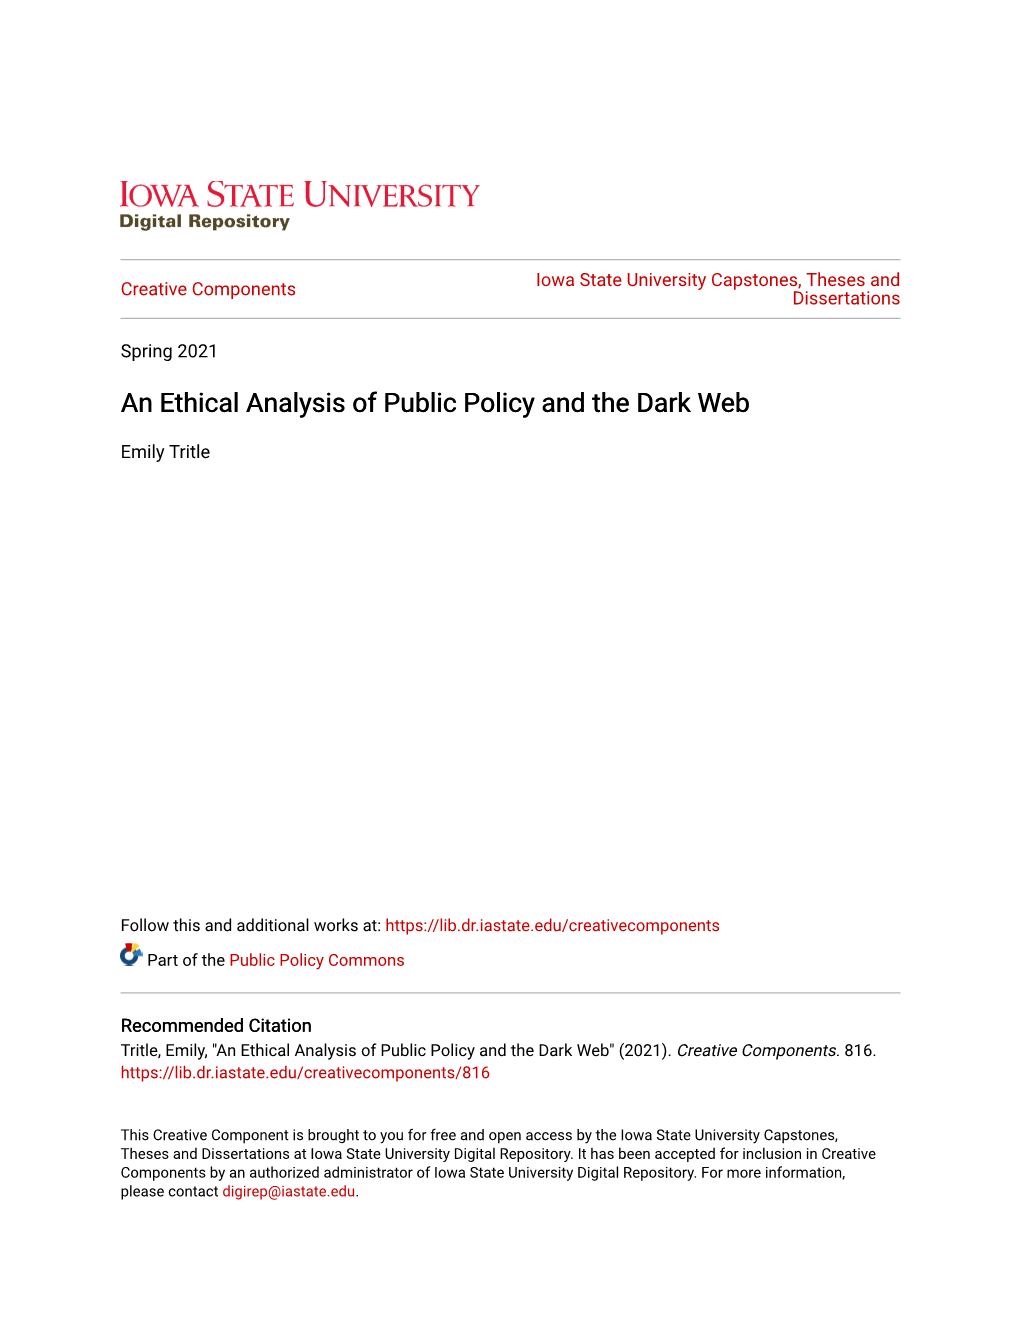 An Ethical Analysis of Public Policy and the Dark Web